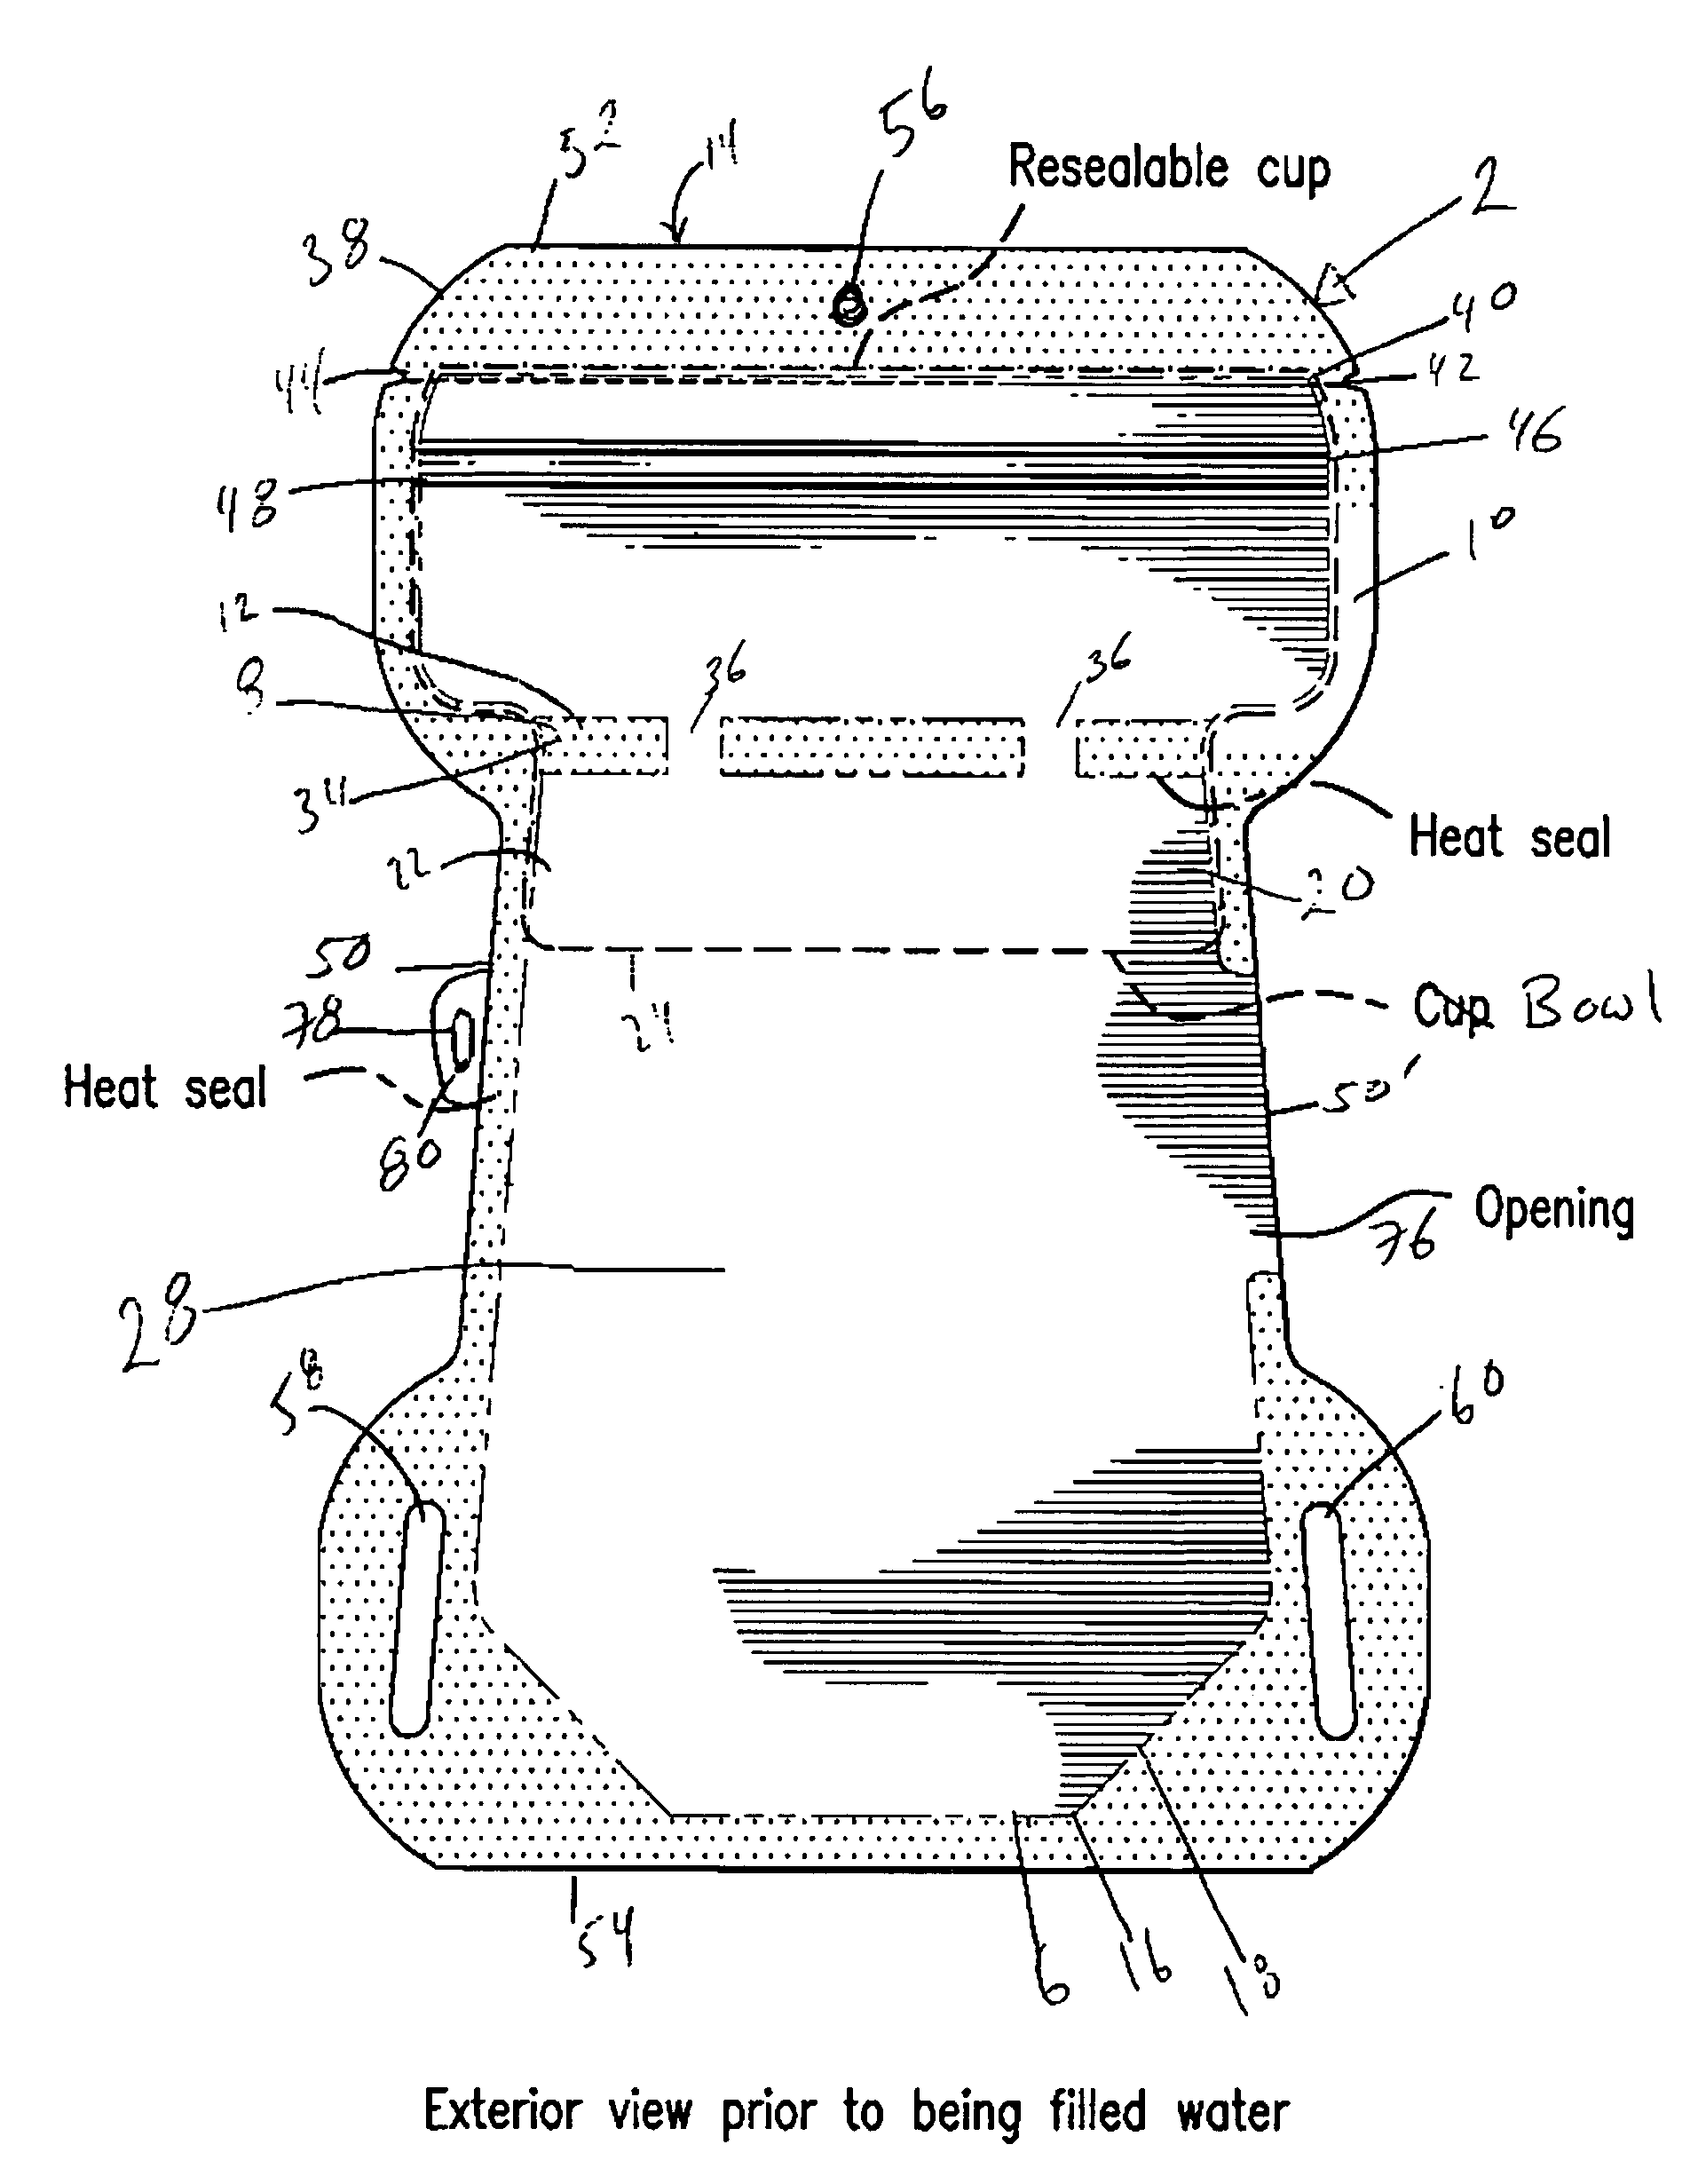 Resealable bowl-in-pouch arrangement and method